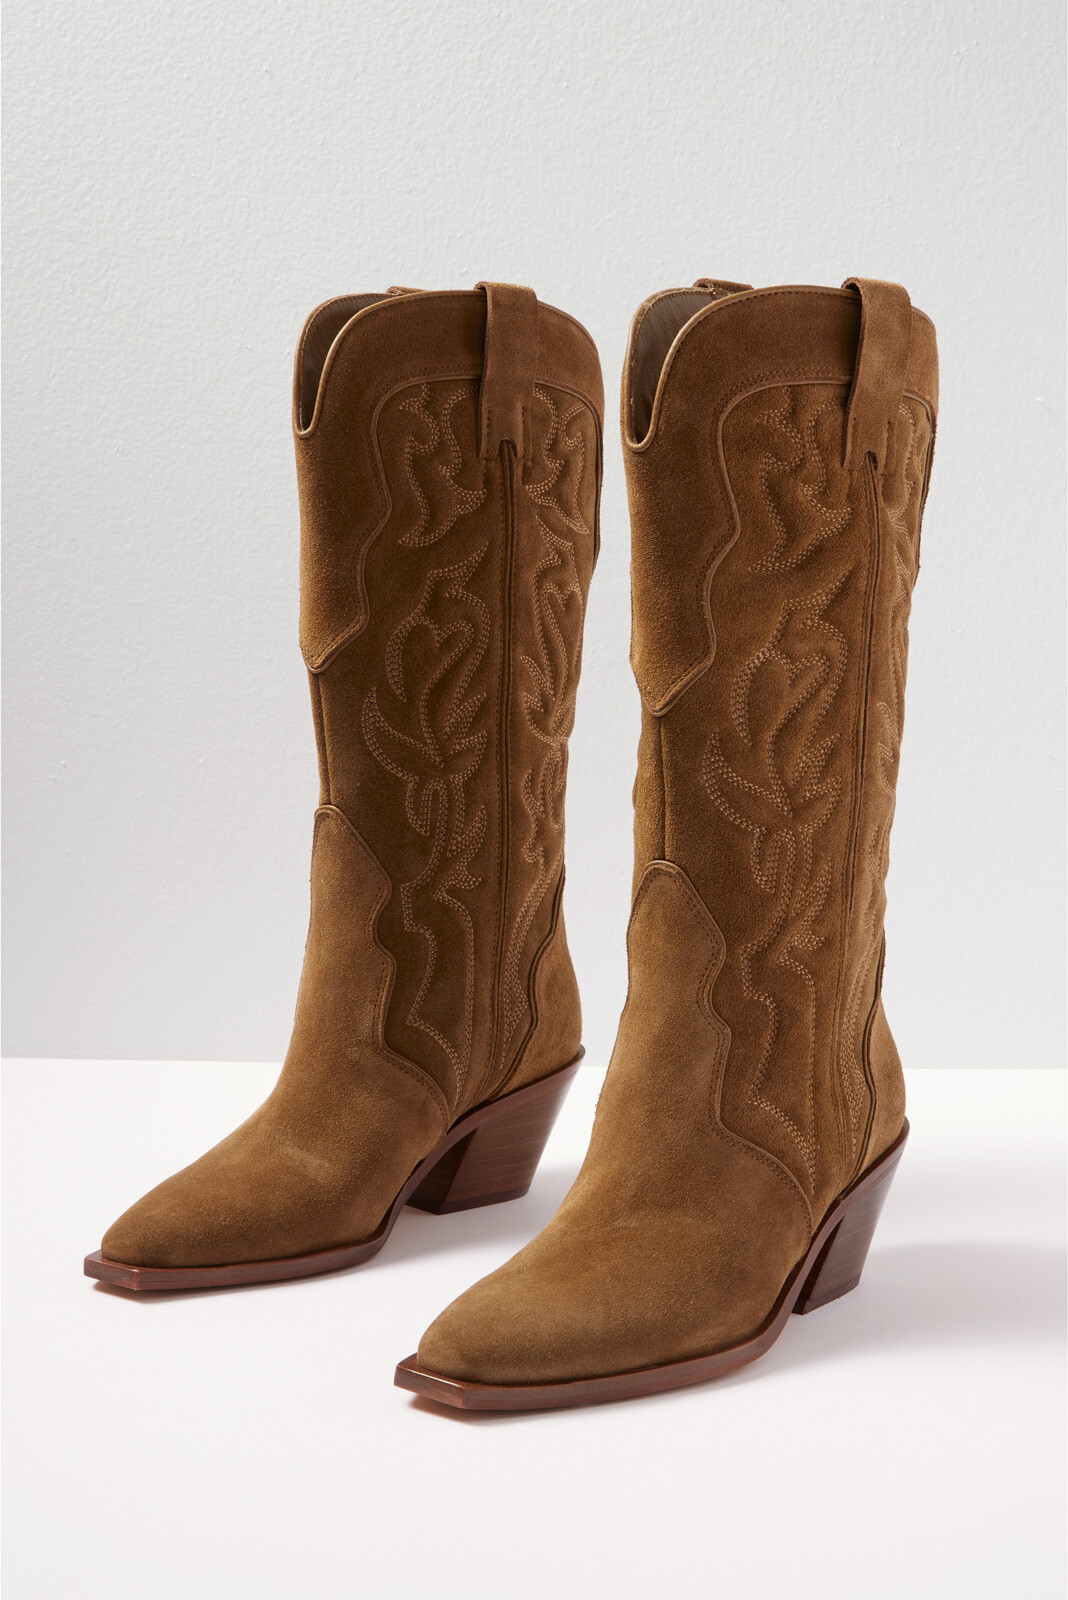 Are Cowboy Boots In Style? Cowboy Boots from Day to Night - Sydne Style